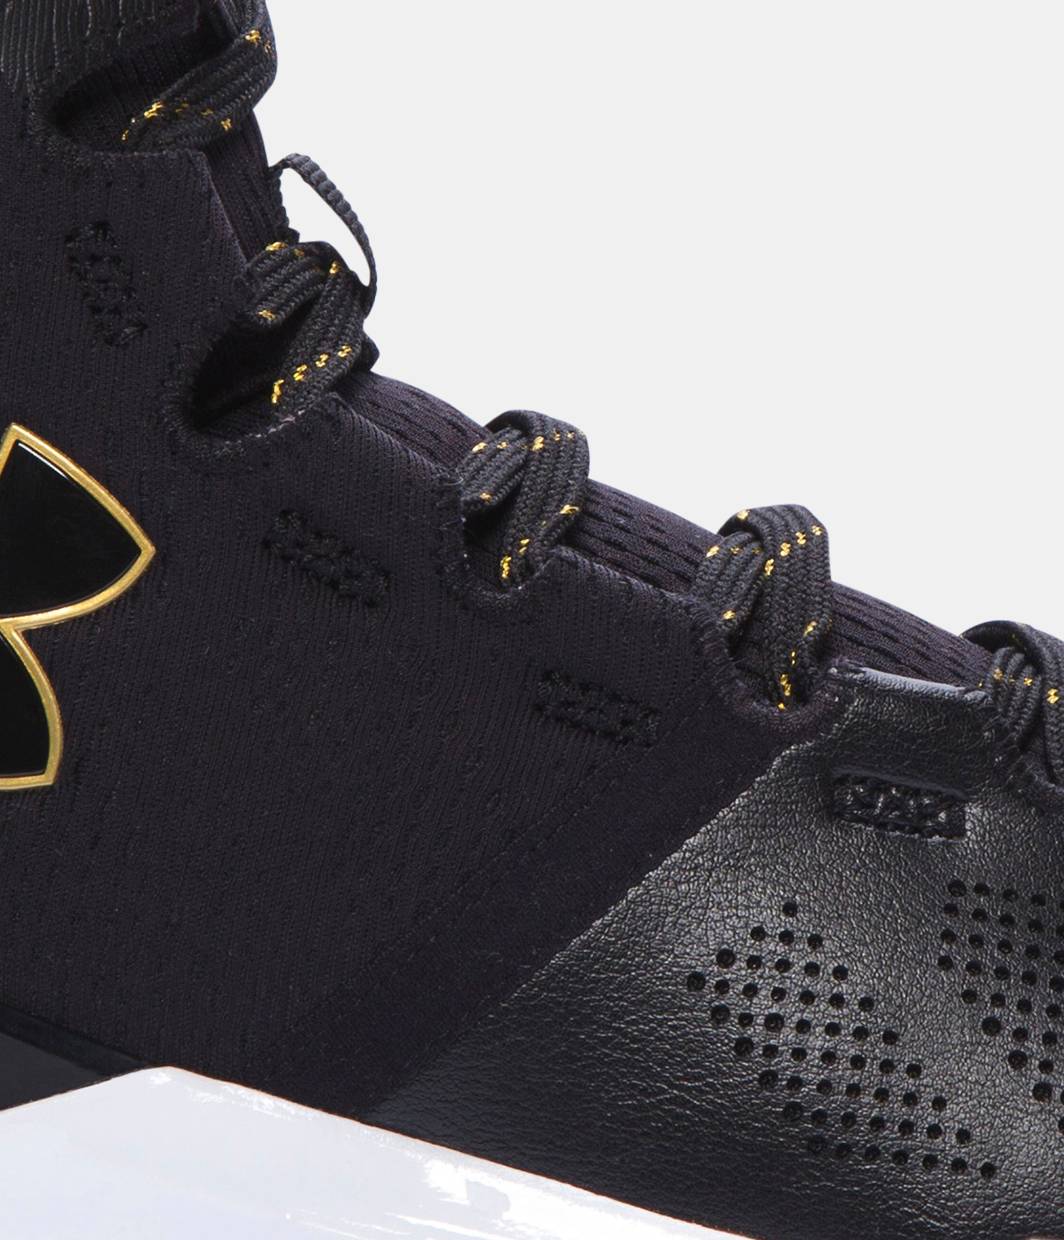 Unboxing Steph Curry's Playoff shoe, the UA Curry 2.5